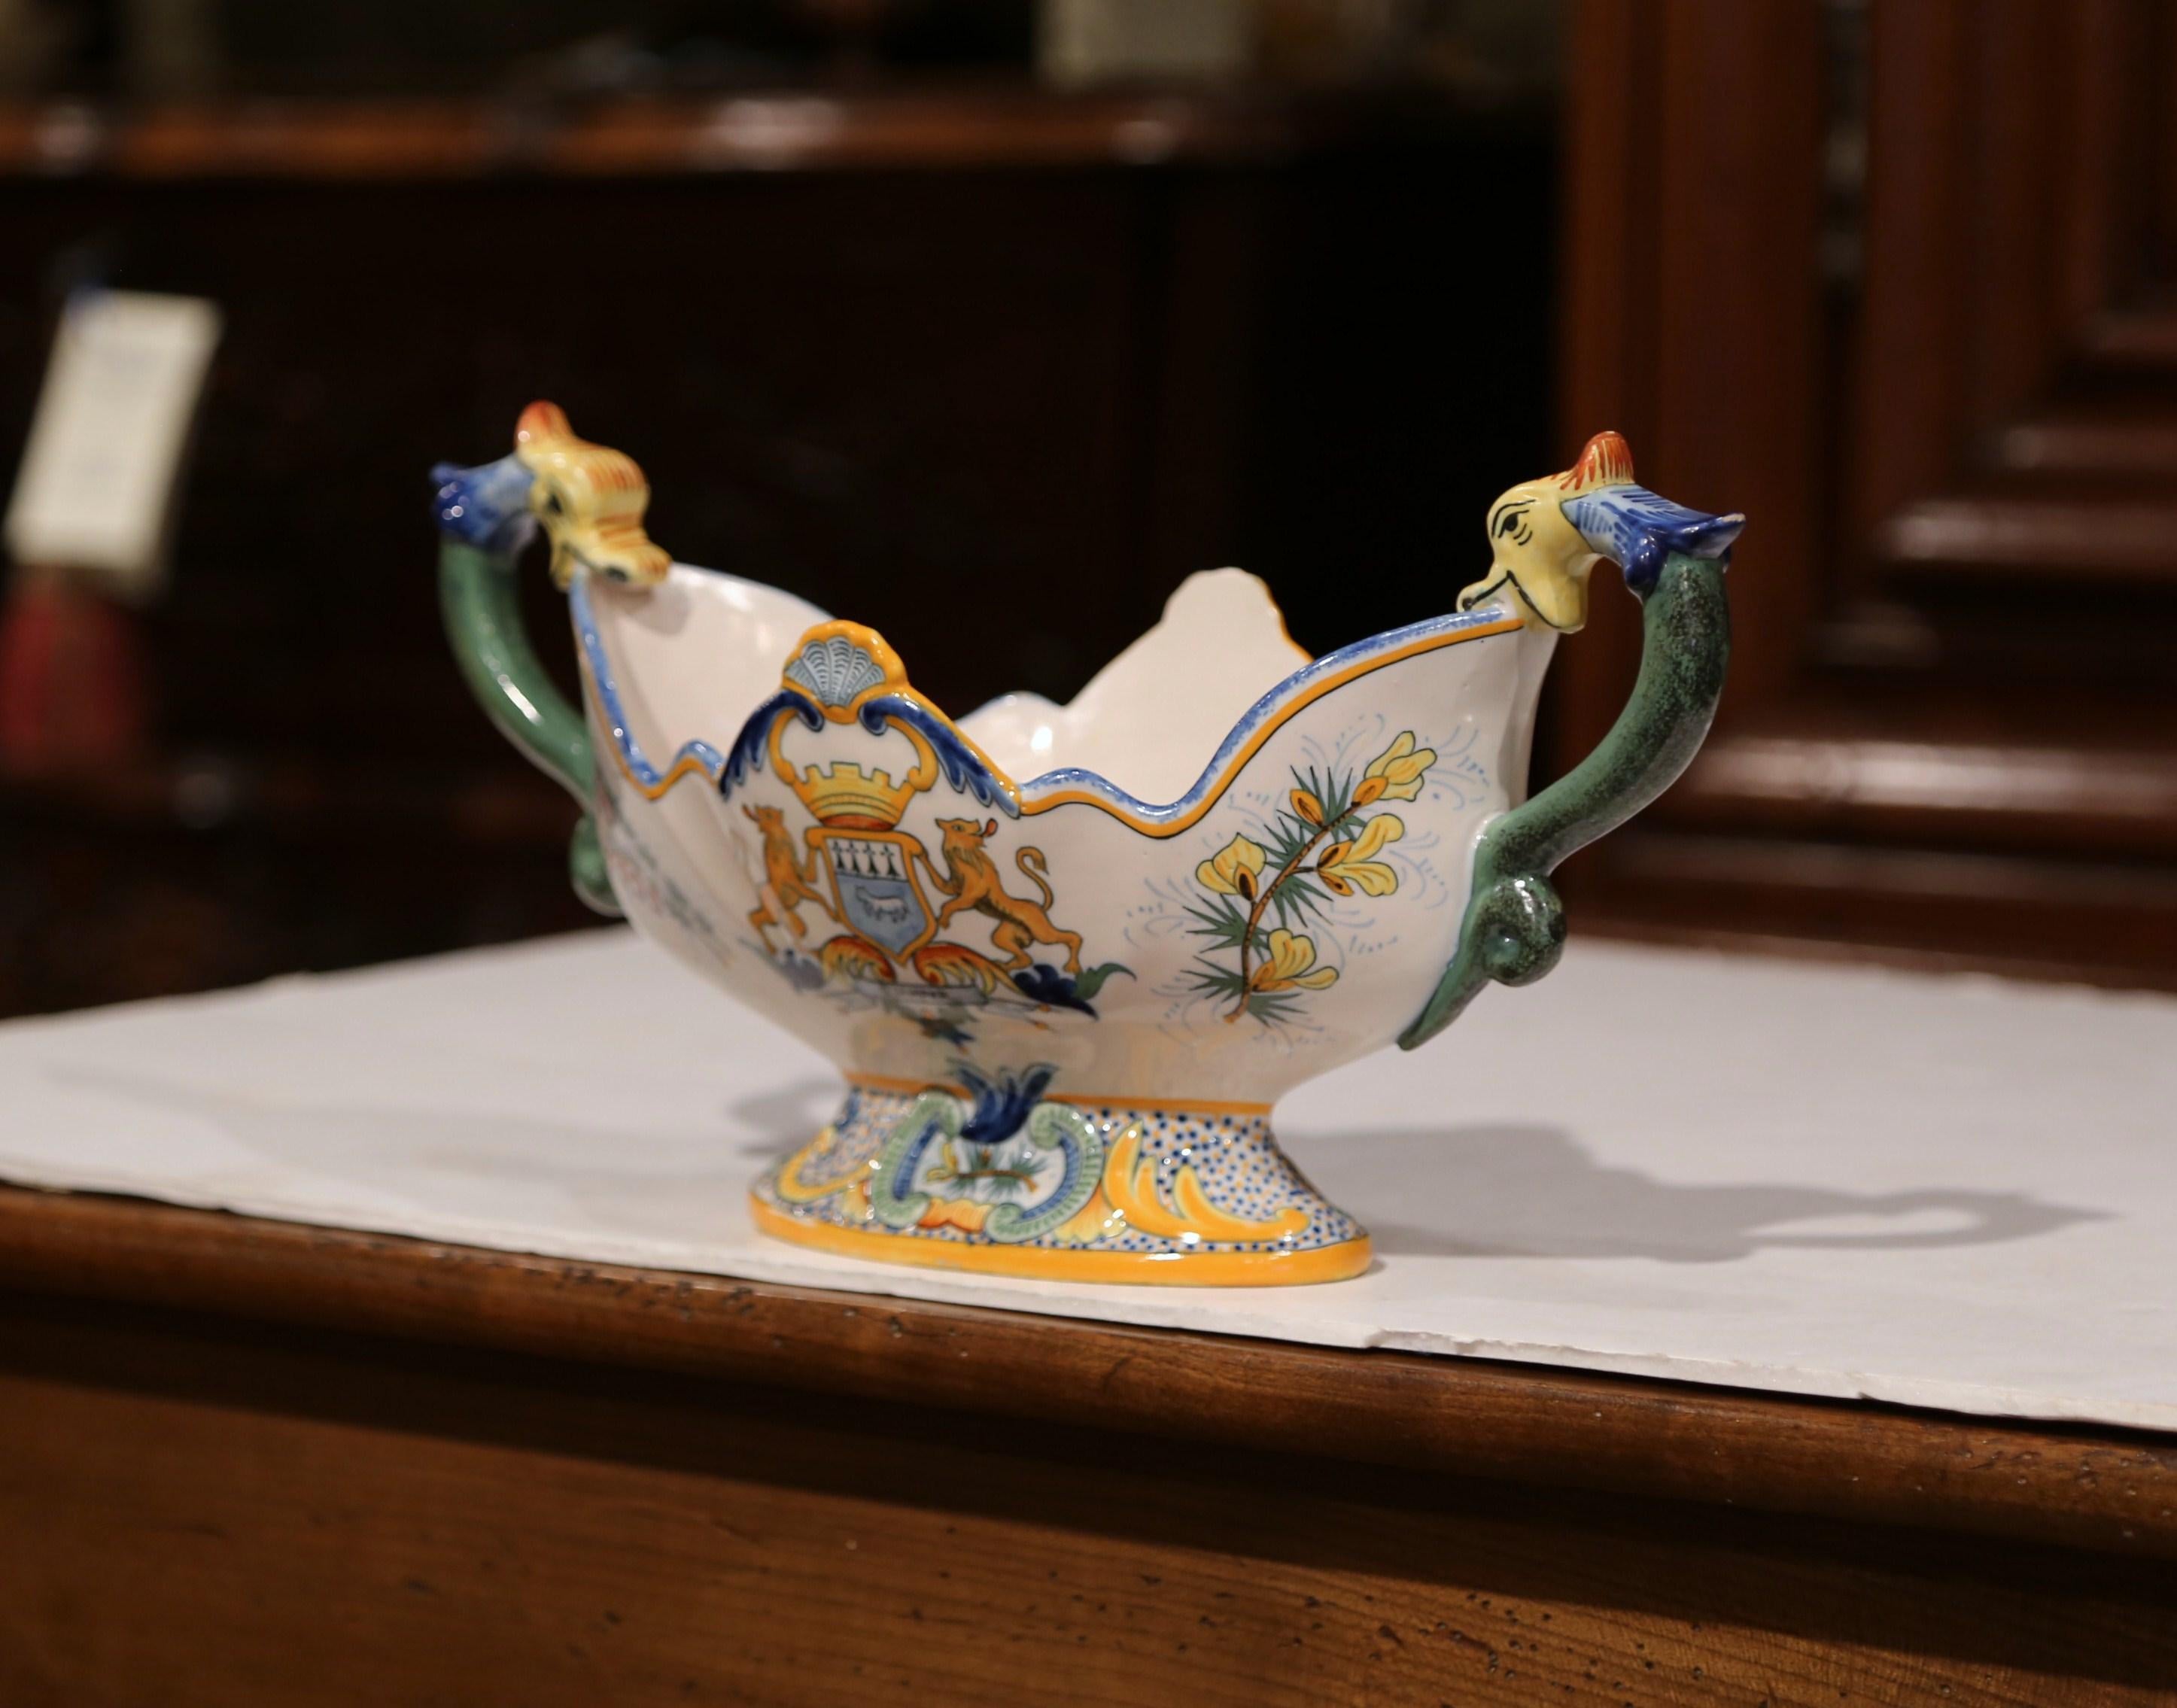 This antique ceramic planter was crafted in Brittany, France, circa 1870. Oval in shape, the colorful jardinière has two elegant side handles and features hand painted decoration throughout. The painted elements include a traditional Breton couple